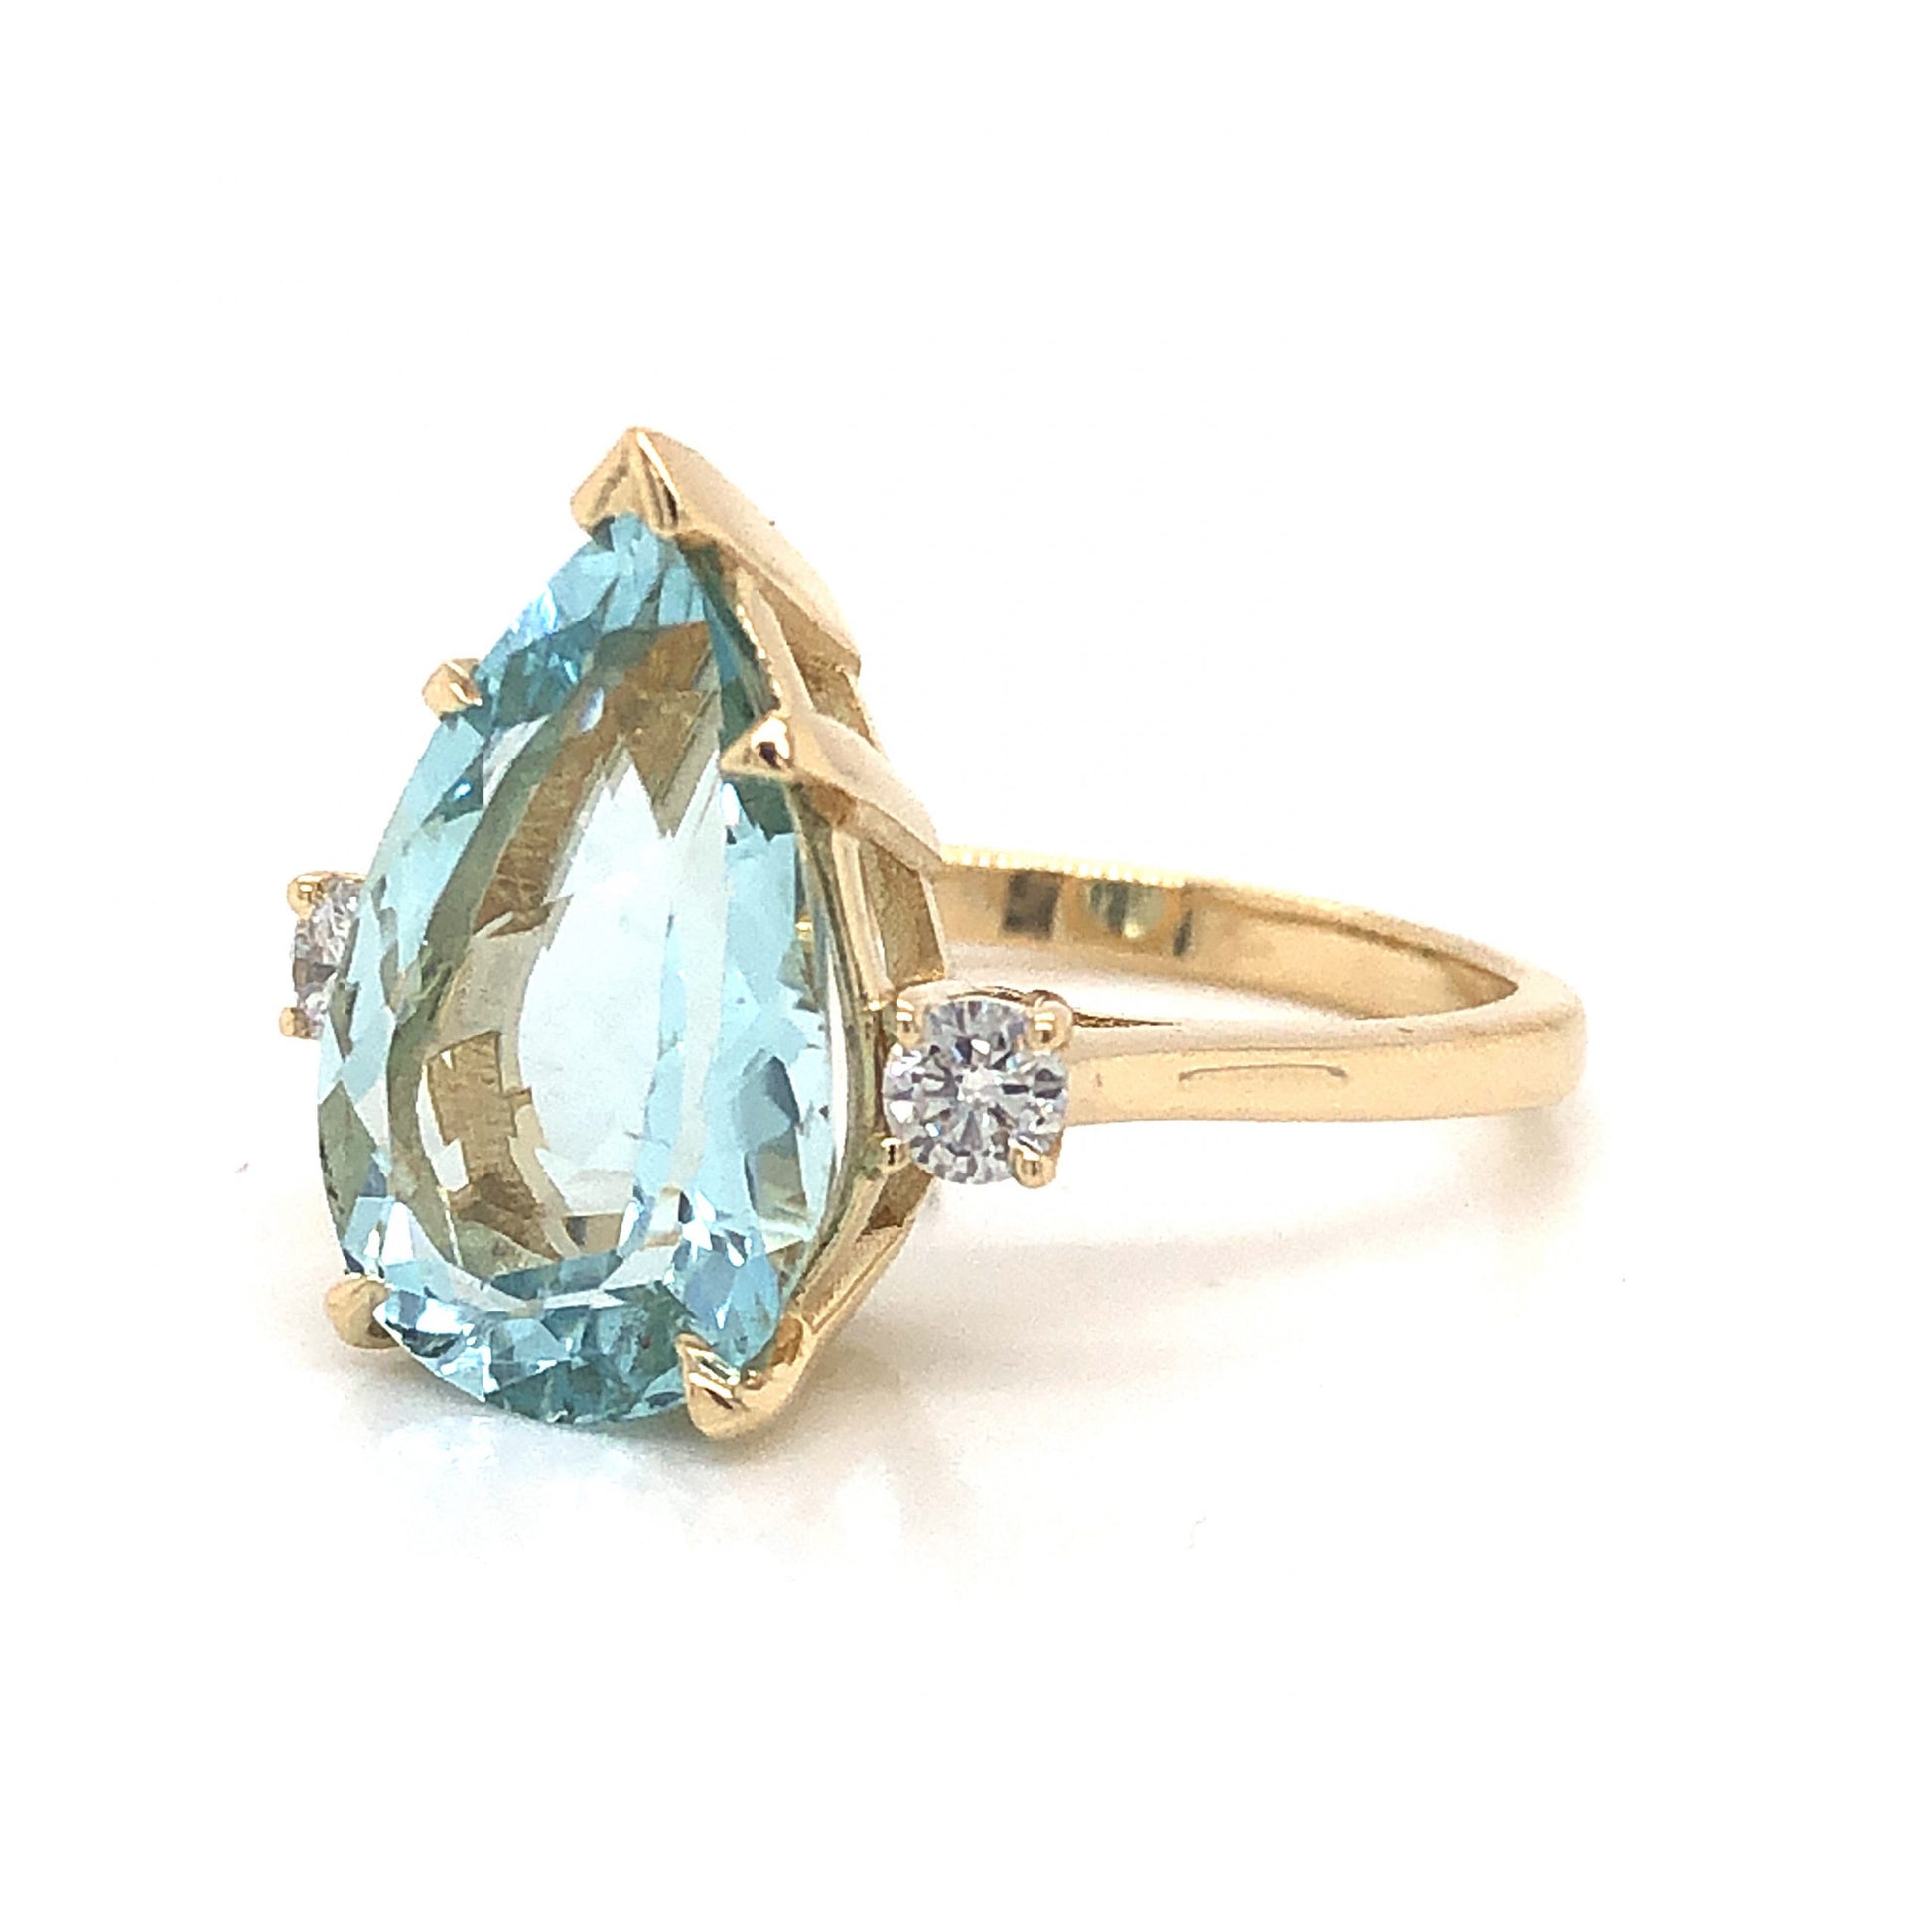 Pear Cut Aquamarine Engagement Ring in 14k Yellow GoldComposition: 14 Karat Yellow GoldRing Size: 6.75Total Diamond Weight: .18 ctTotal Gram Weight: 4.7 gInscription: 14K